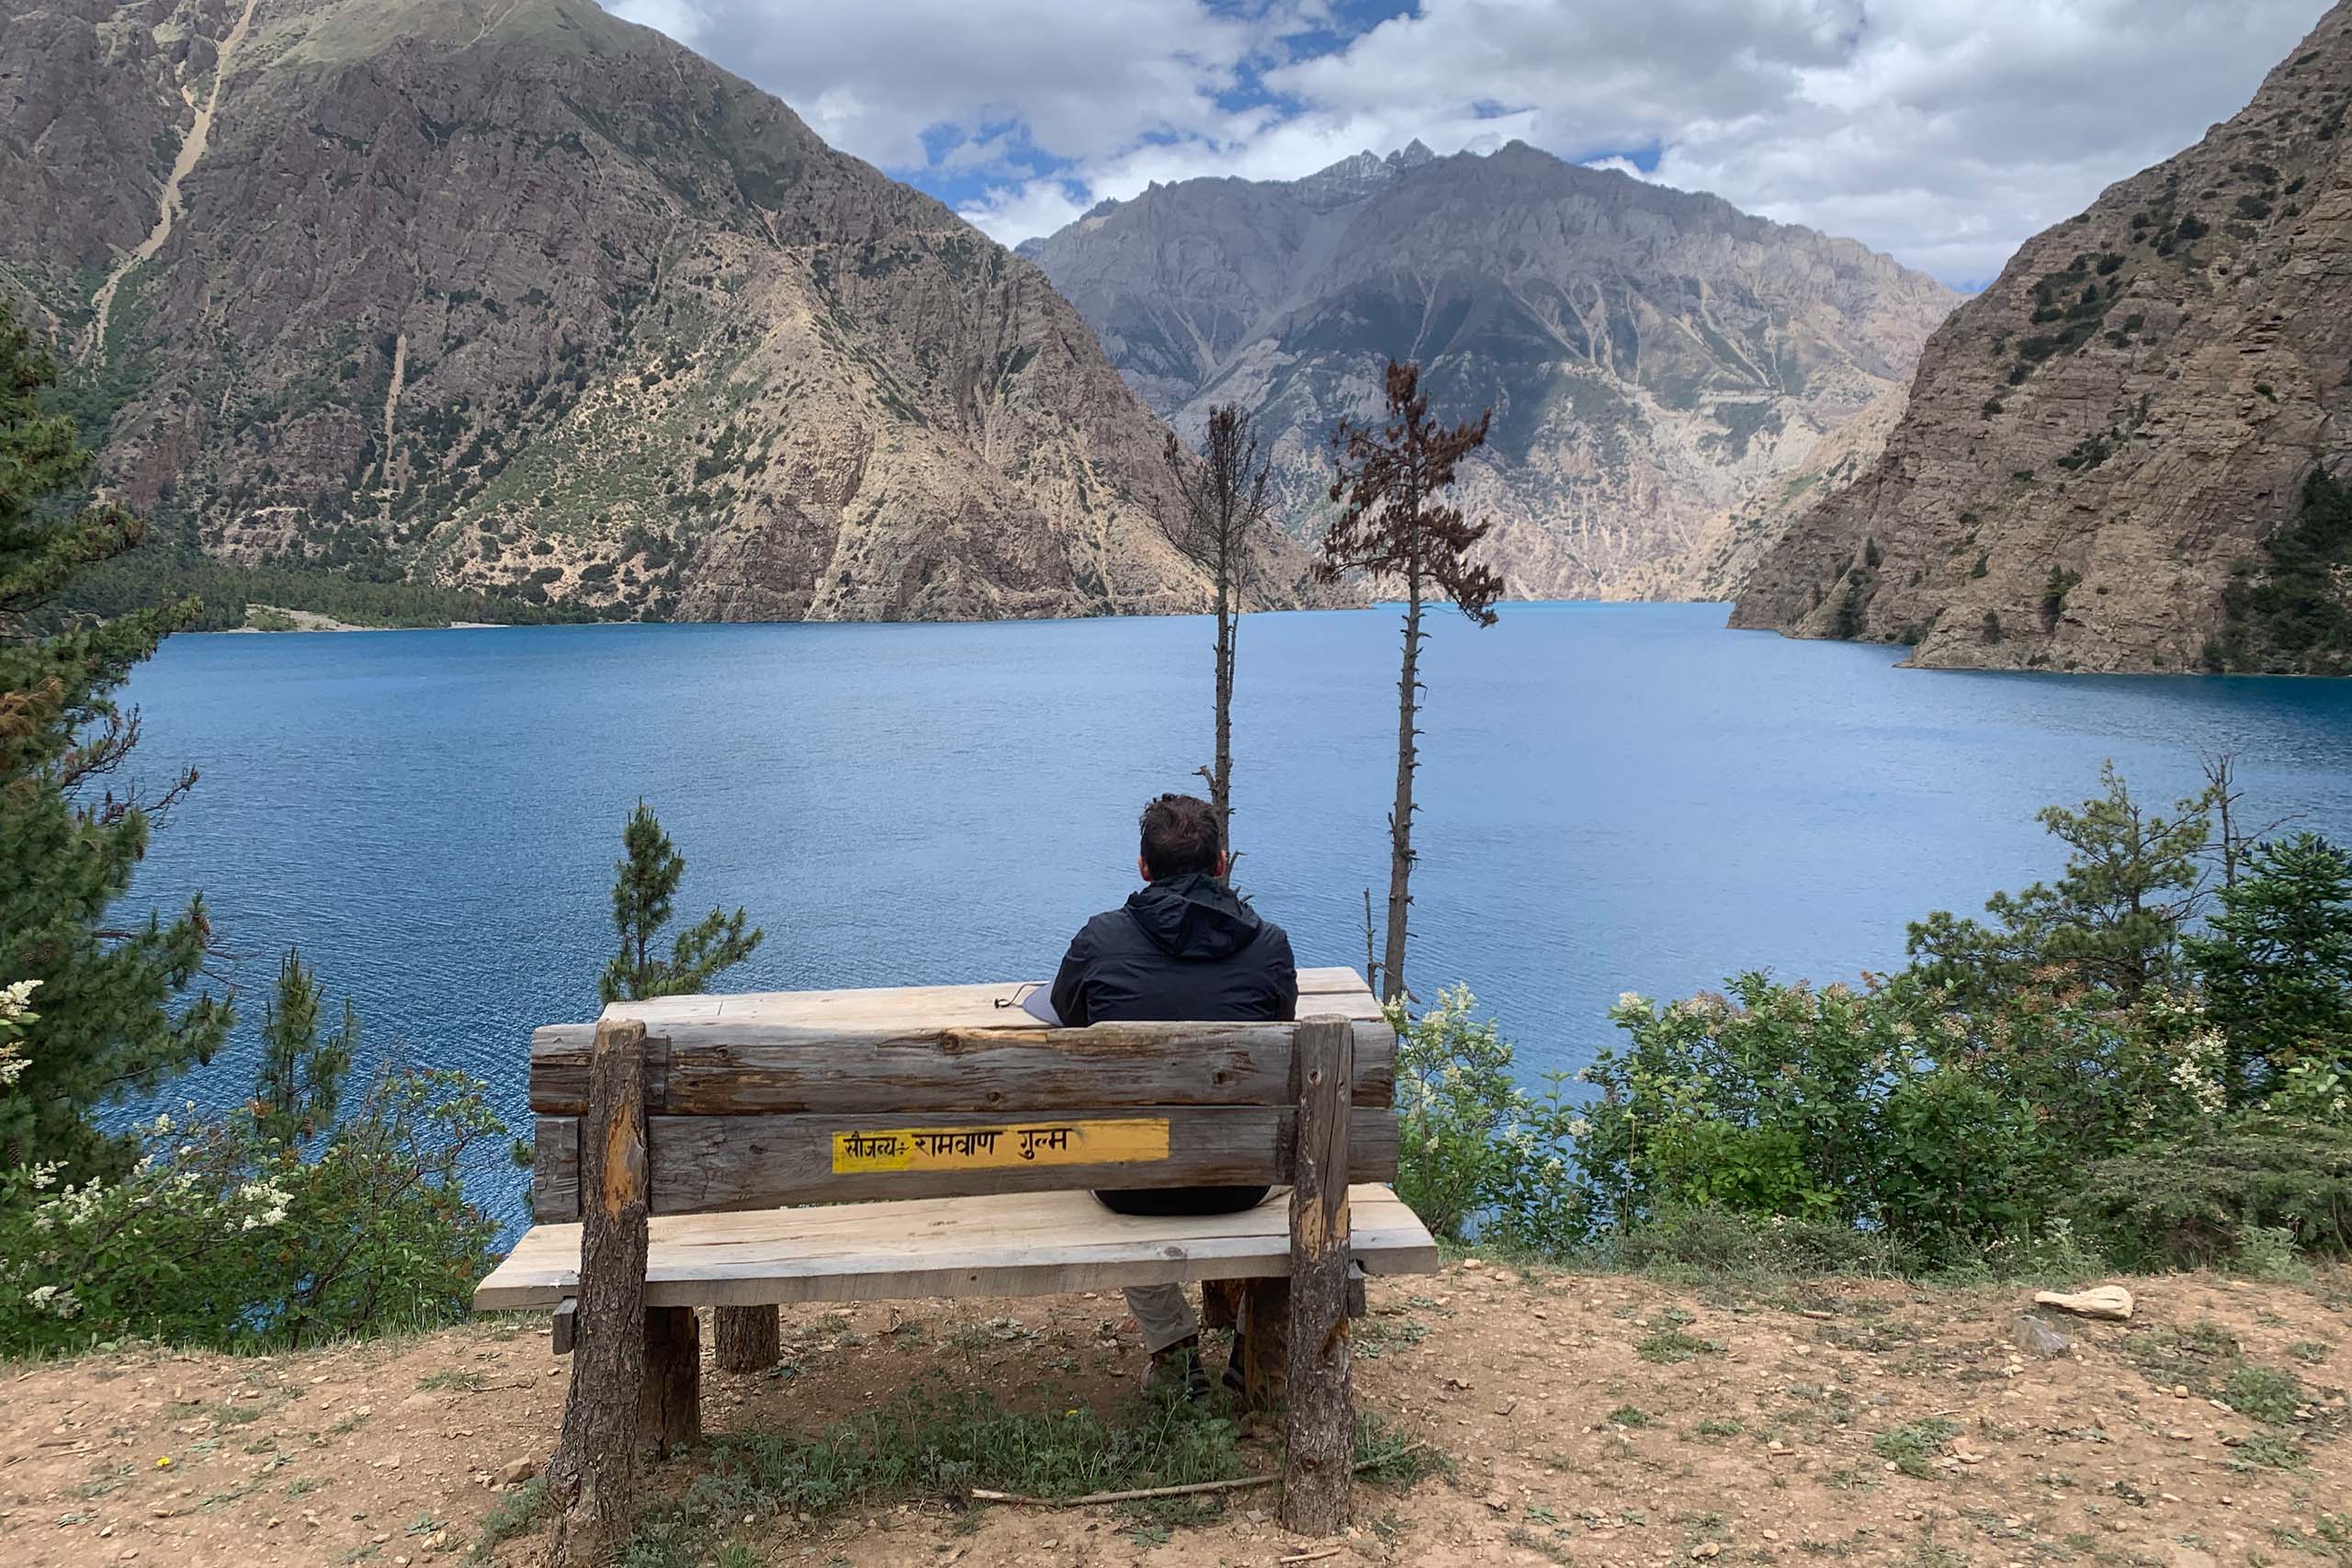 Coles, beside the blue river in the Upper Dolpa region of Nepal. “You get a sense as if you’re touching heaven,” he says. “And you can’t really explain it, you have to go.”